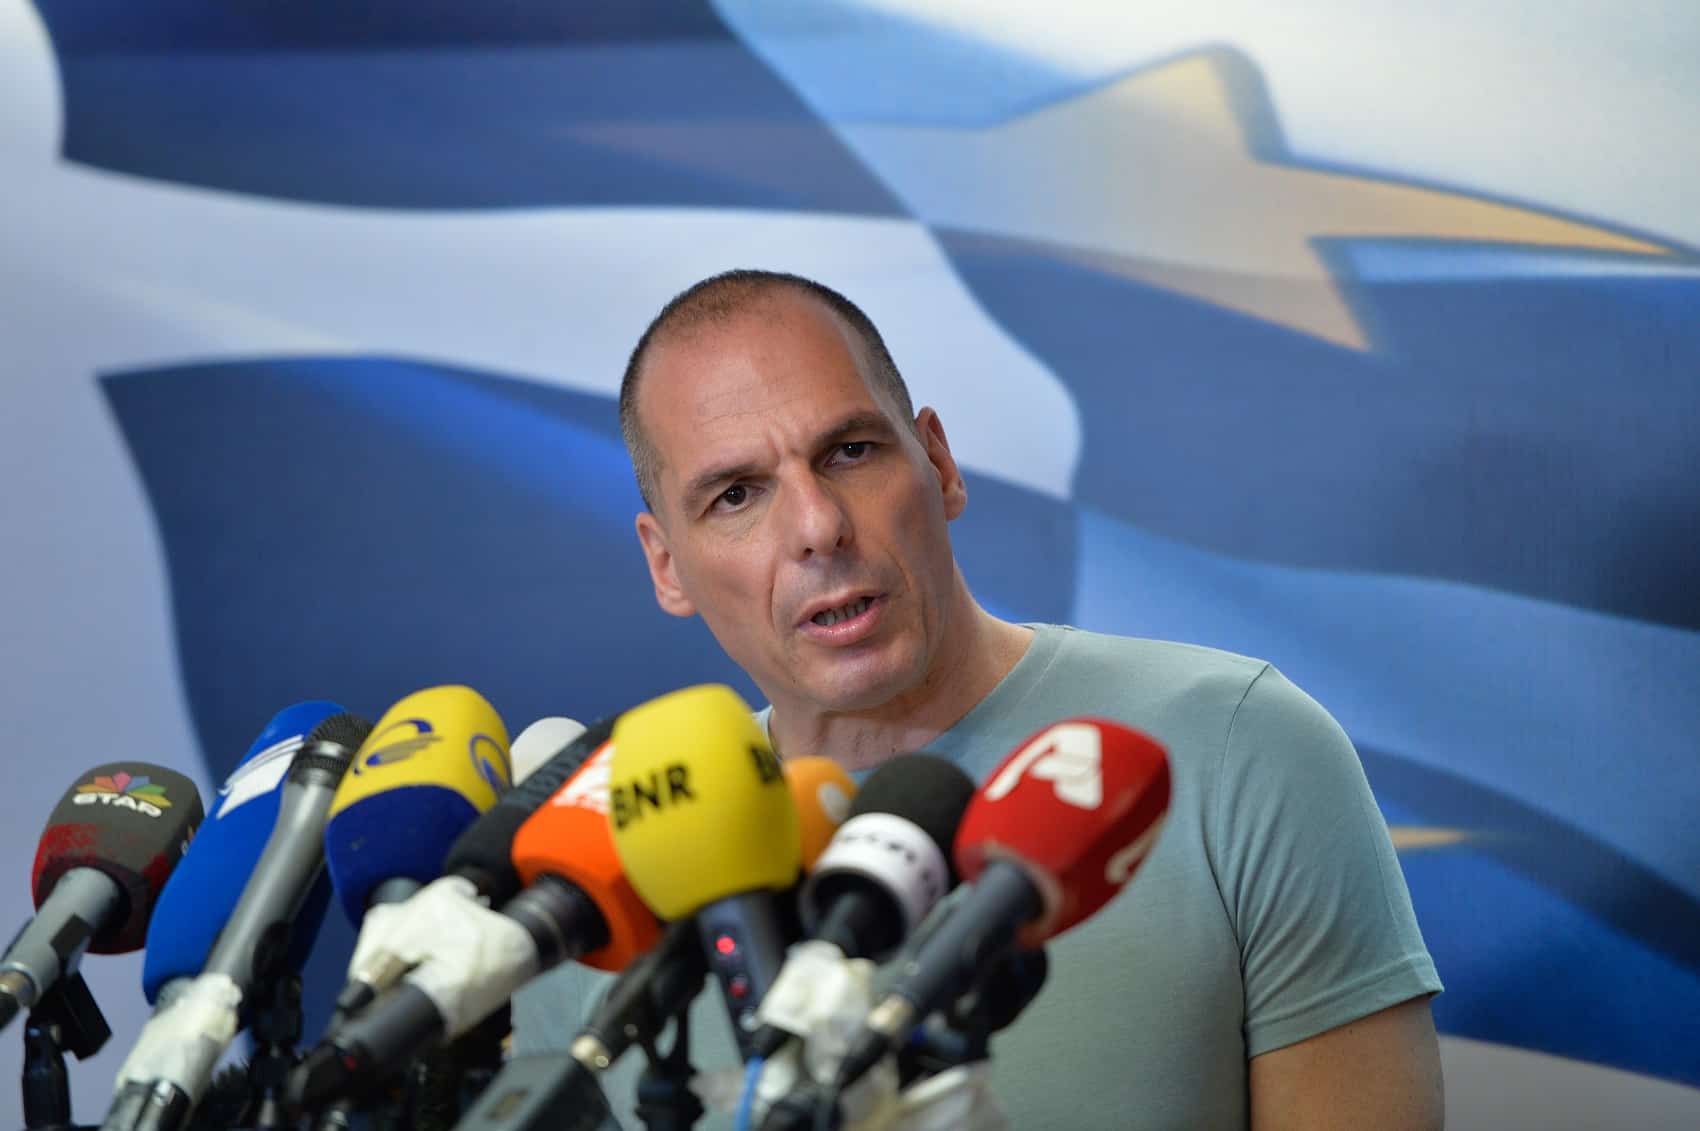 Greek Finance Minister Yanis Varoufakis gives a press conference in Athens on July 5, 2015, after early results showed those who rejected further austerity measures in a Greek crucial bailout referendum were poised to win.